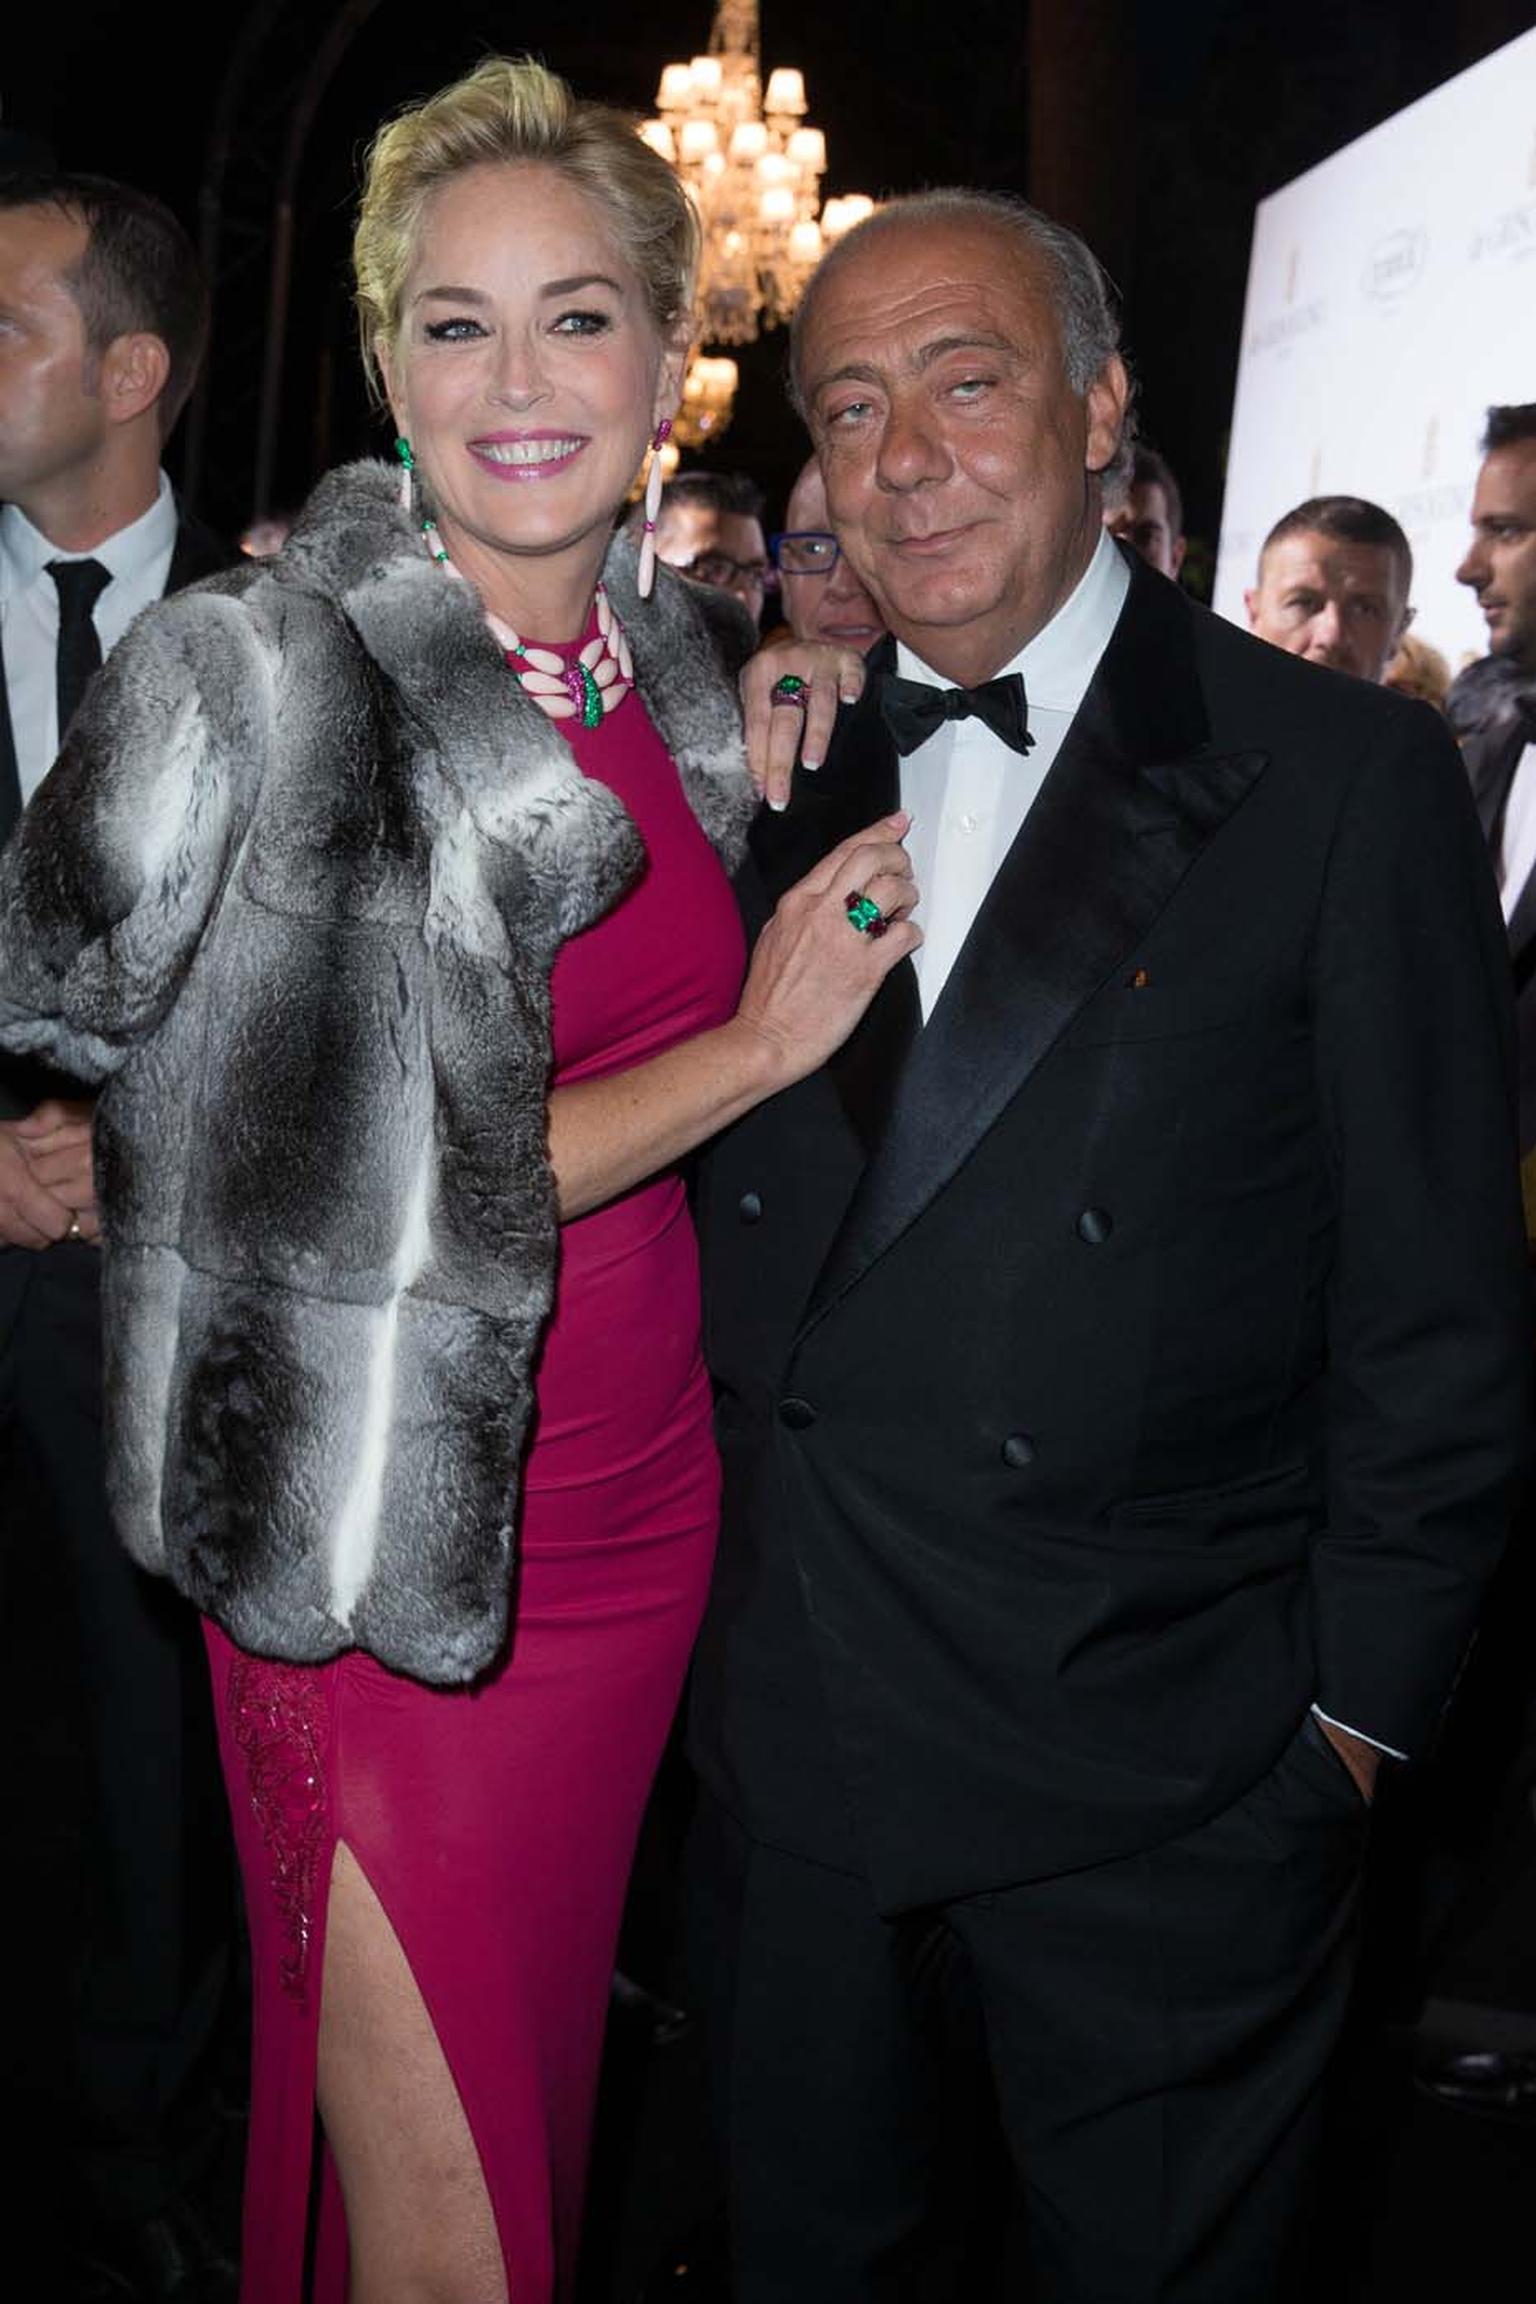 Posing with de GRISOGONO's founder Fawaz Gruosi, Sharon Stone shows off her evening's jewellery choices, which included a three-strand de GRISOGONO coral necklace and matching earrings